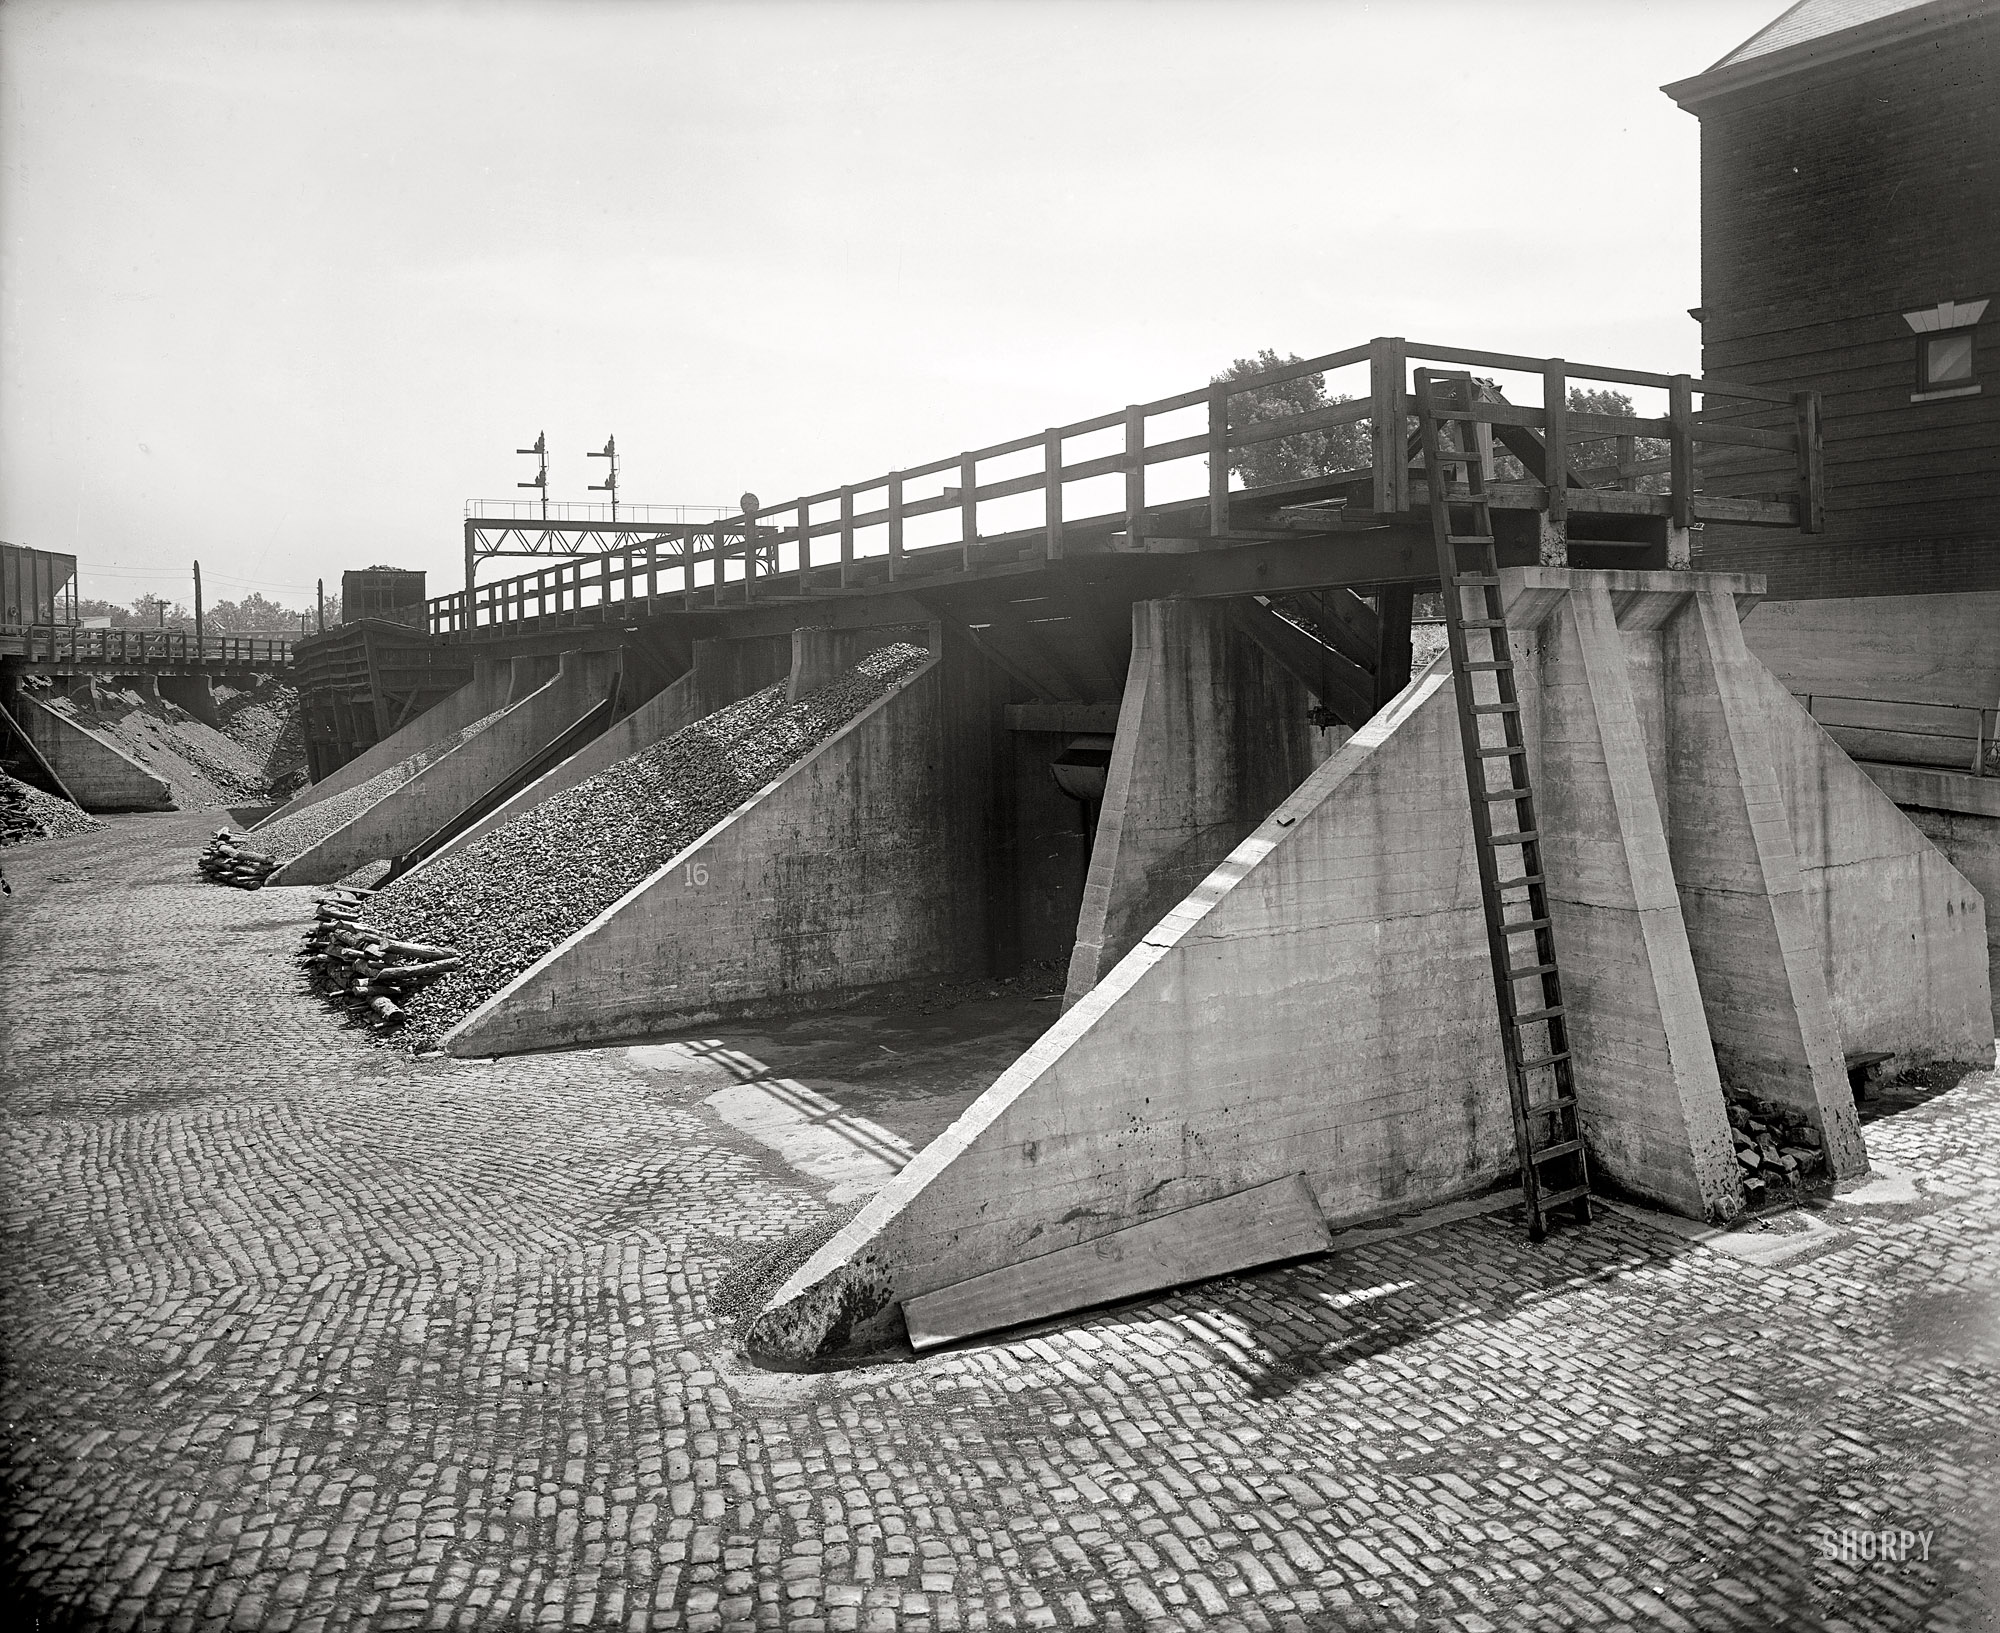 Another view from 1925 of the W.H. Hessick & Son coal yard in Northeast Washington, D.C. By December 1925, the company had moved to 14th and Water Streets S.W. National Photo Company Collection glass negative. View full size.